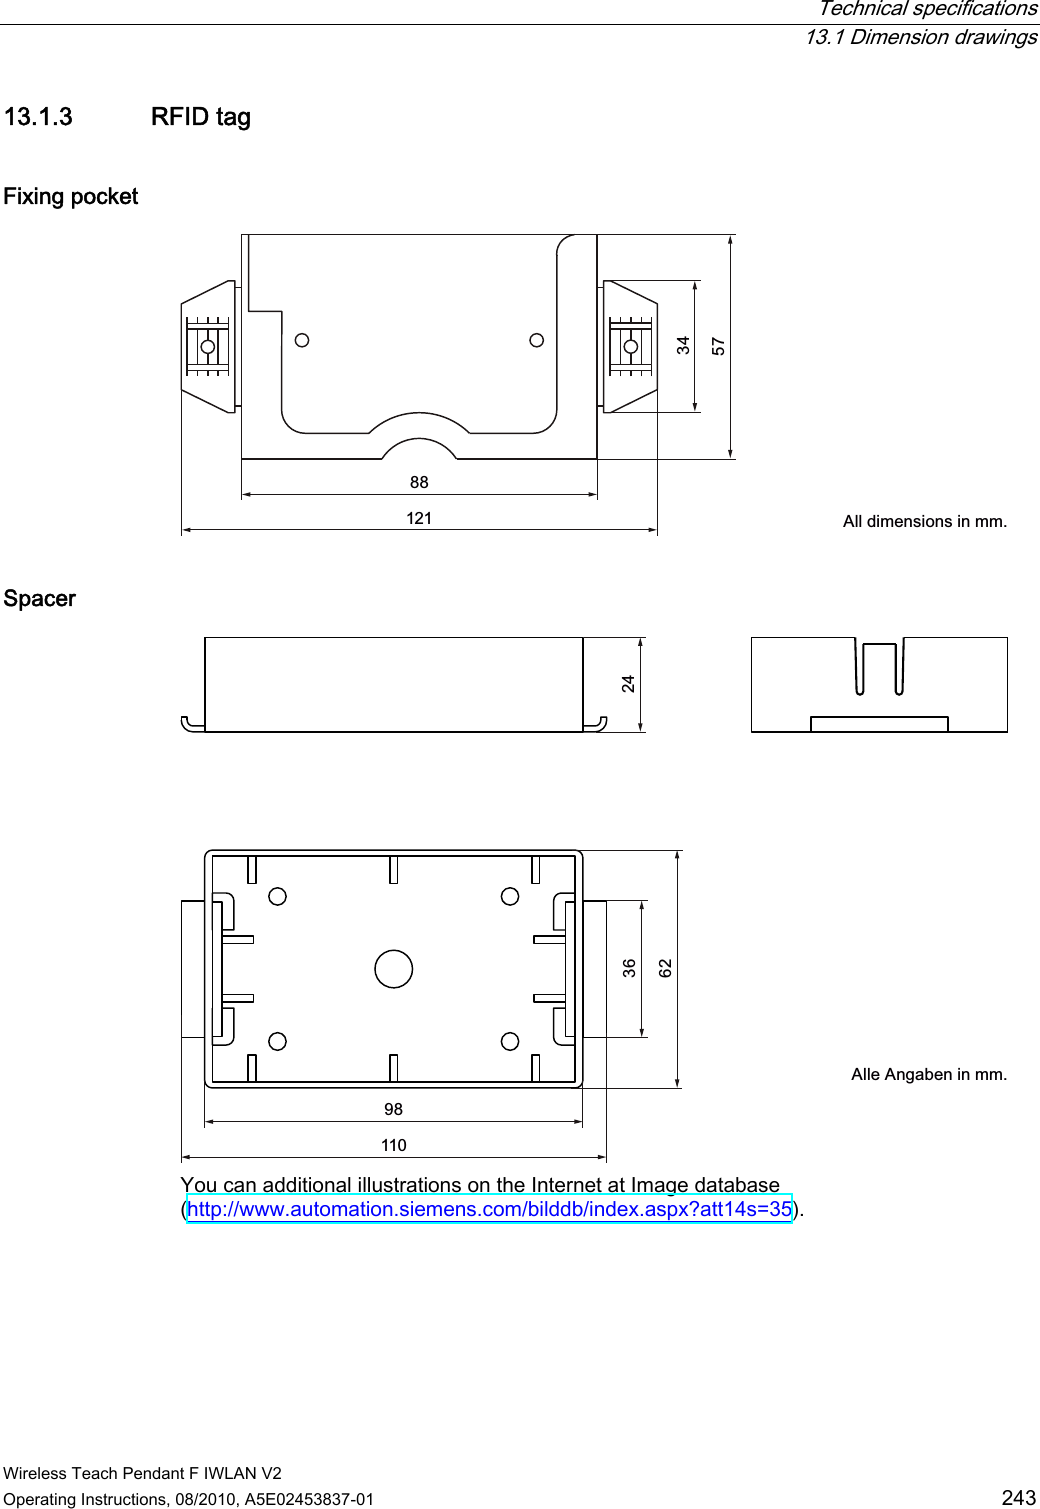  Technical specifications  13.1 Dimension drawings Wireless Teach Pendant F IWLAN V2 Operating Instructions, 08/2010, A5E02453837-01  243 13.1.3 RFID tag Fixing pocket  $OOGLPHQVLRQVLQPP Spacer  $OOH$QJDEHQLQPP You can additional illustrations on the Internet at Image database (http://www.automation.siemens.com/bilddb/index.aspx?att14s=35). PRELIMINARY II 1.7.2010